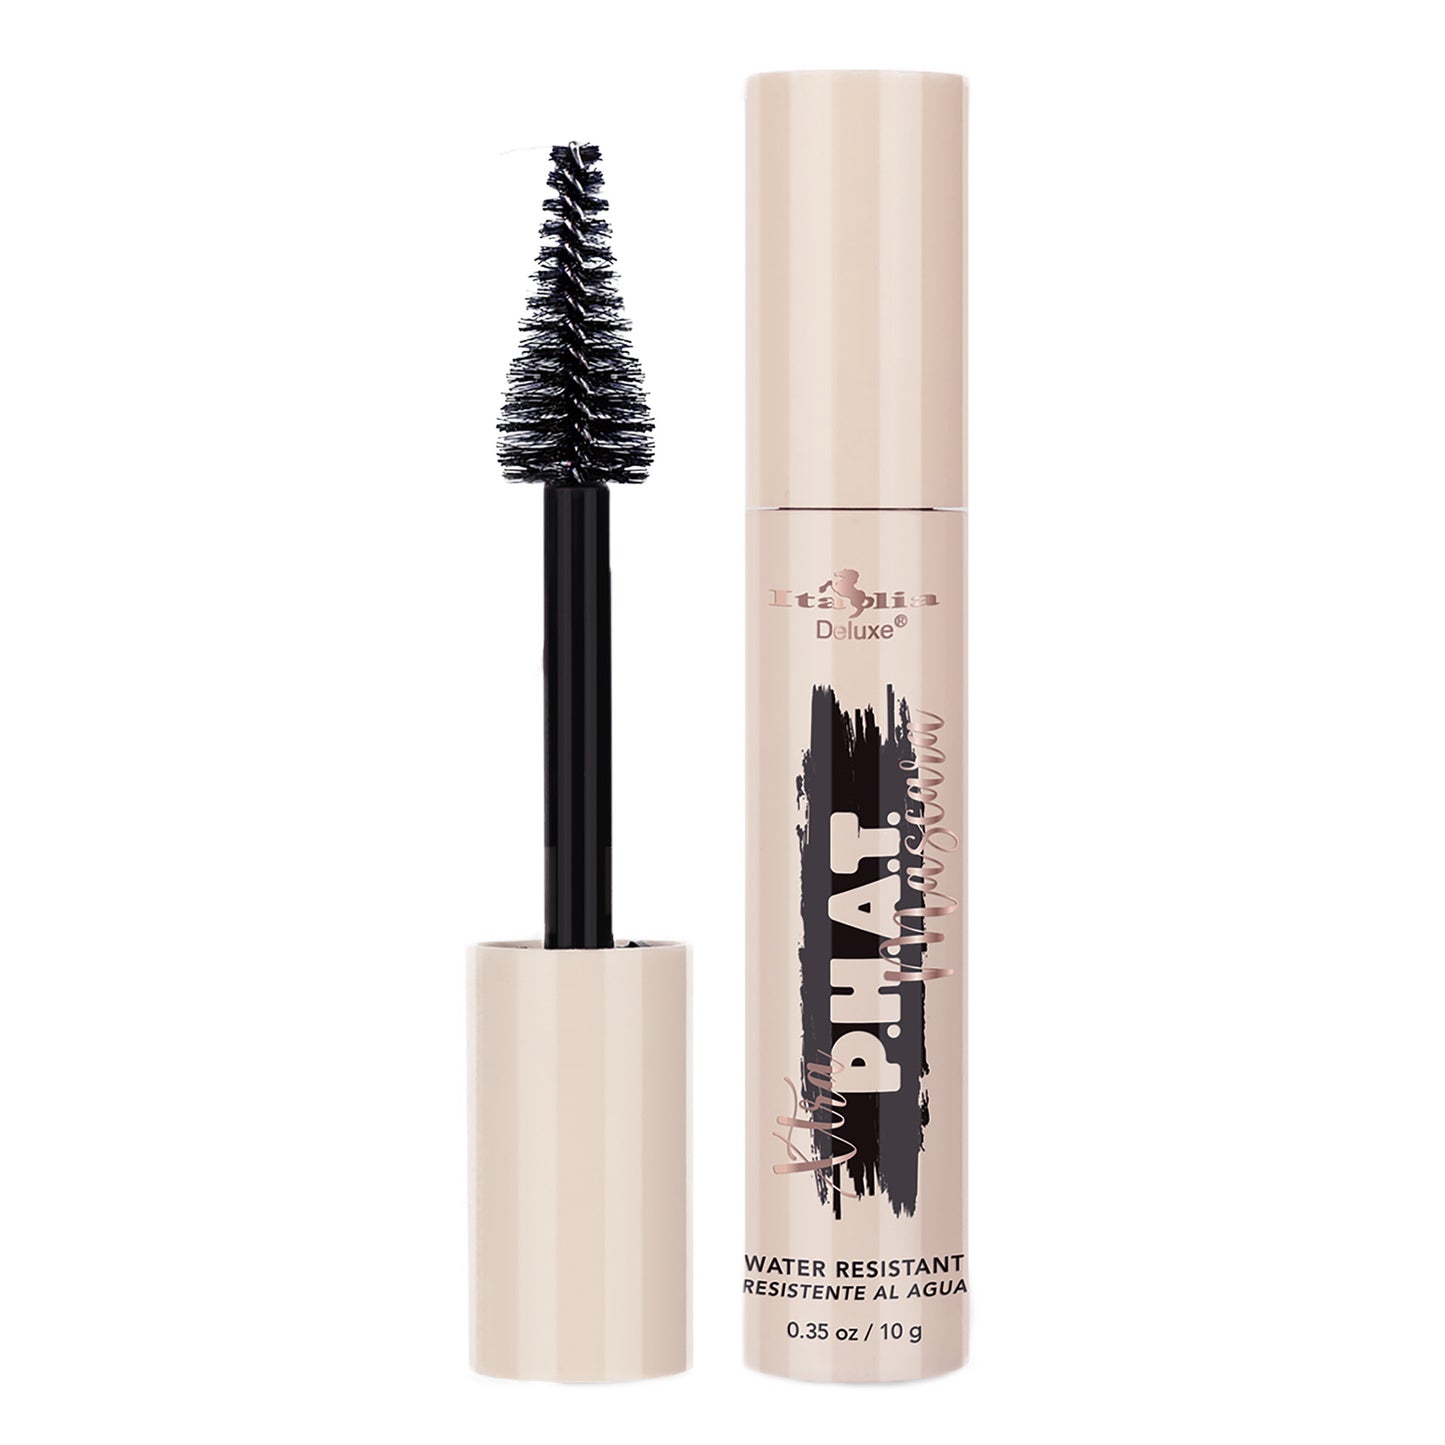 Close-up image showcasing the Xtra P.H.A.T. Mascara tube, emphasizing its intense black color and a fat brush designed for volumizing and lengthening lashes.